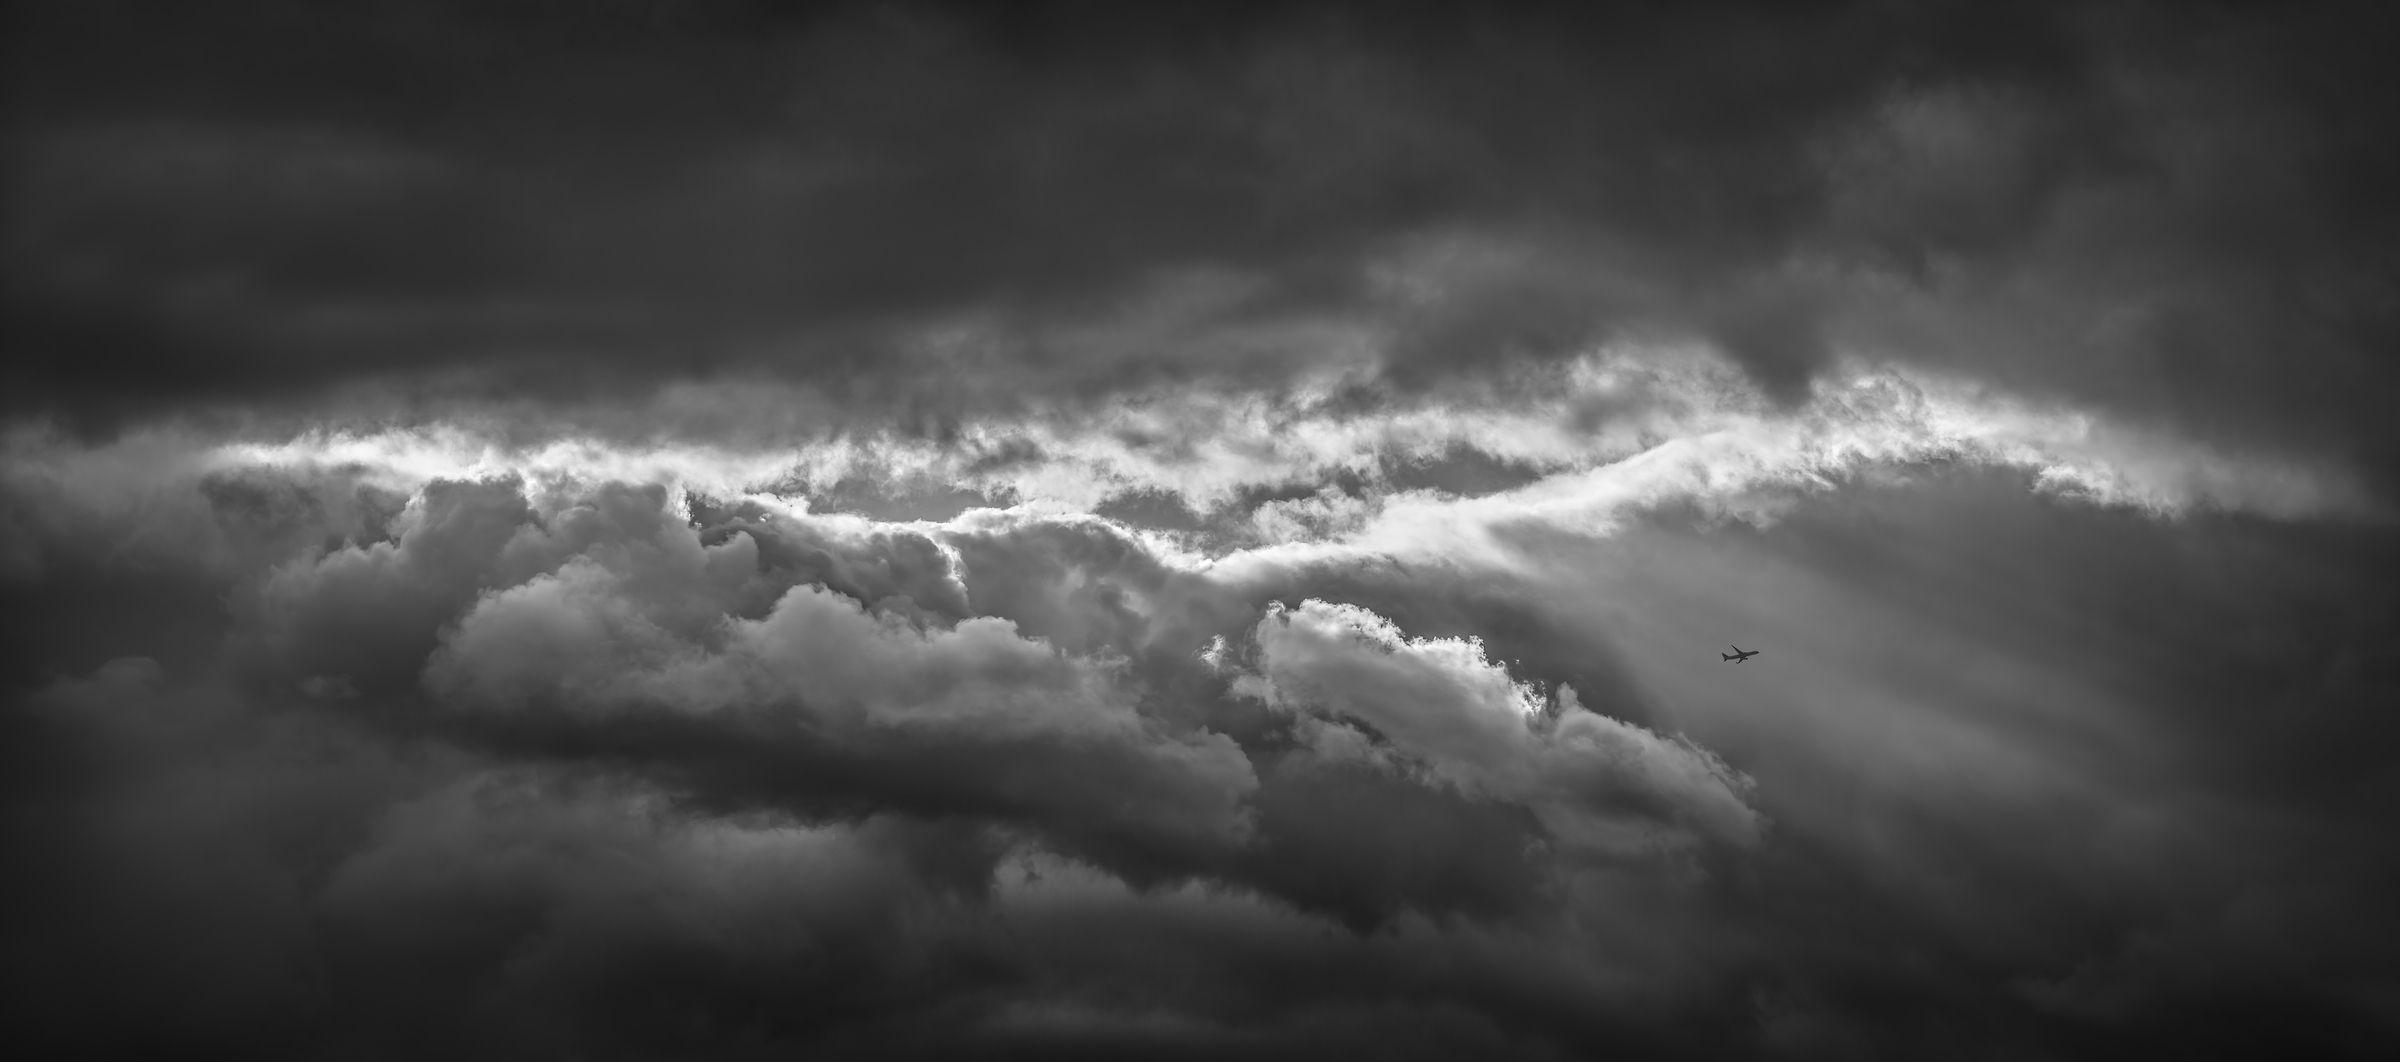 532 megapixels! A very high resolution, black & white VAST photo print of an epic cloud formation; fine art photograph created by Dan Piech in New York City.